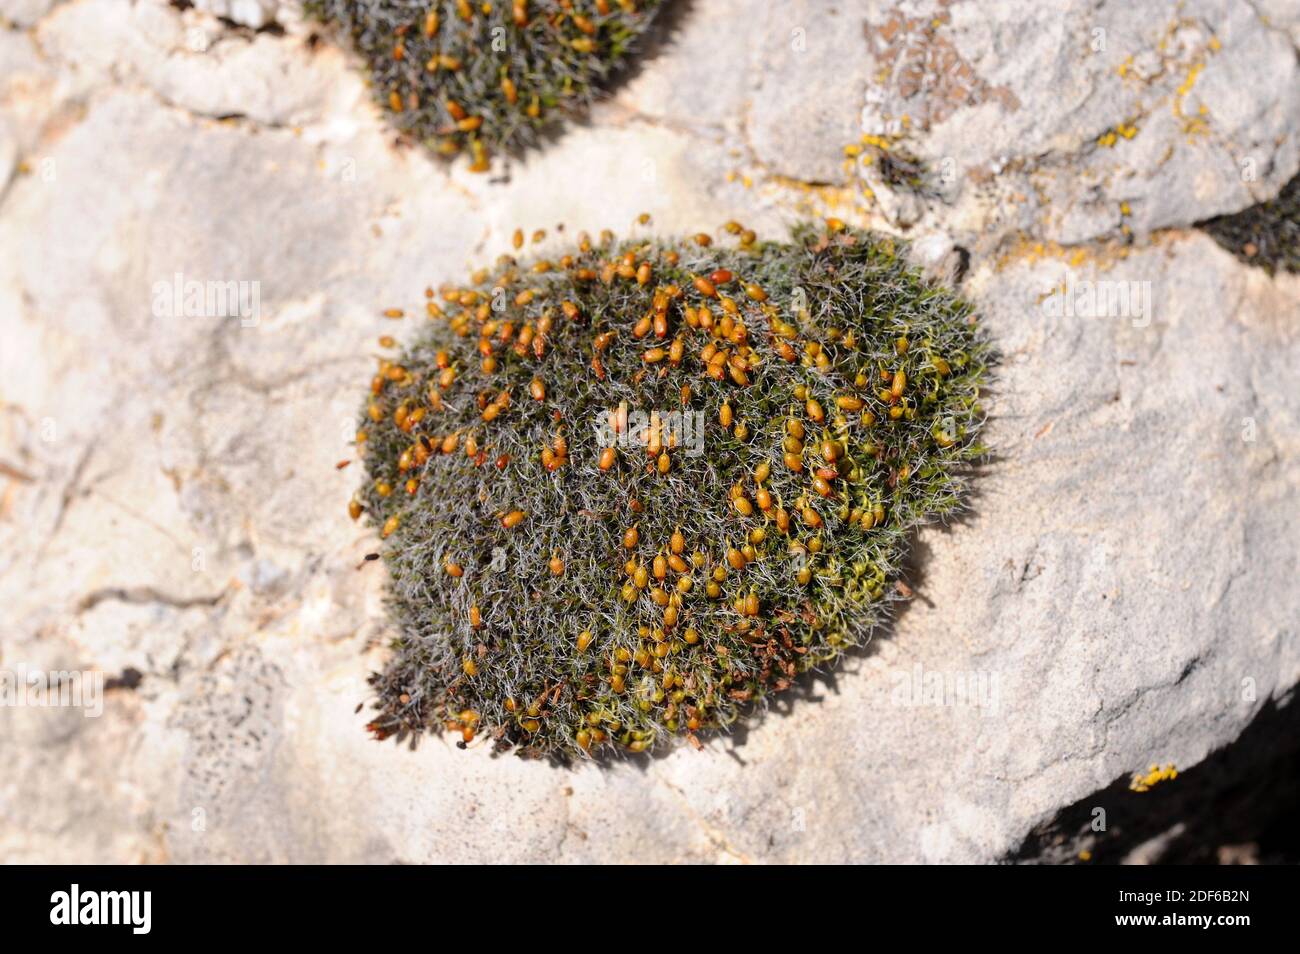 Grimmia orbicularis is a moss in hemispherical cushions of grey-green color. Grow up limestone rocks. Bryophyta. Bryopsida. Grimmiaceae. This photo Stock Photo